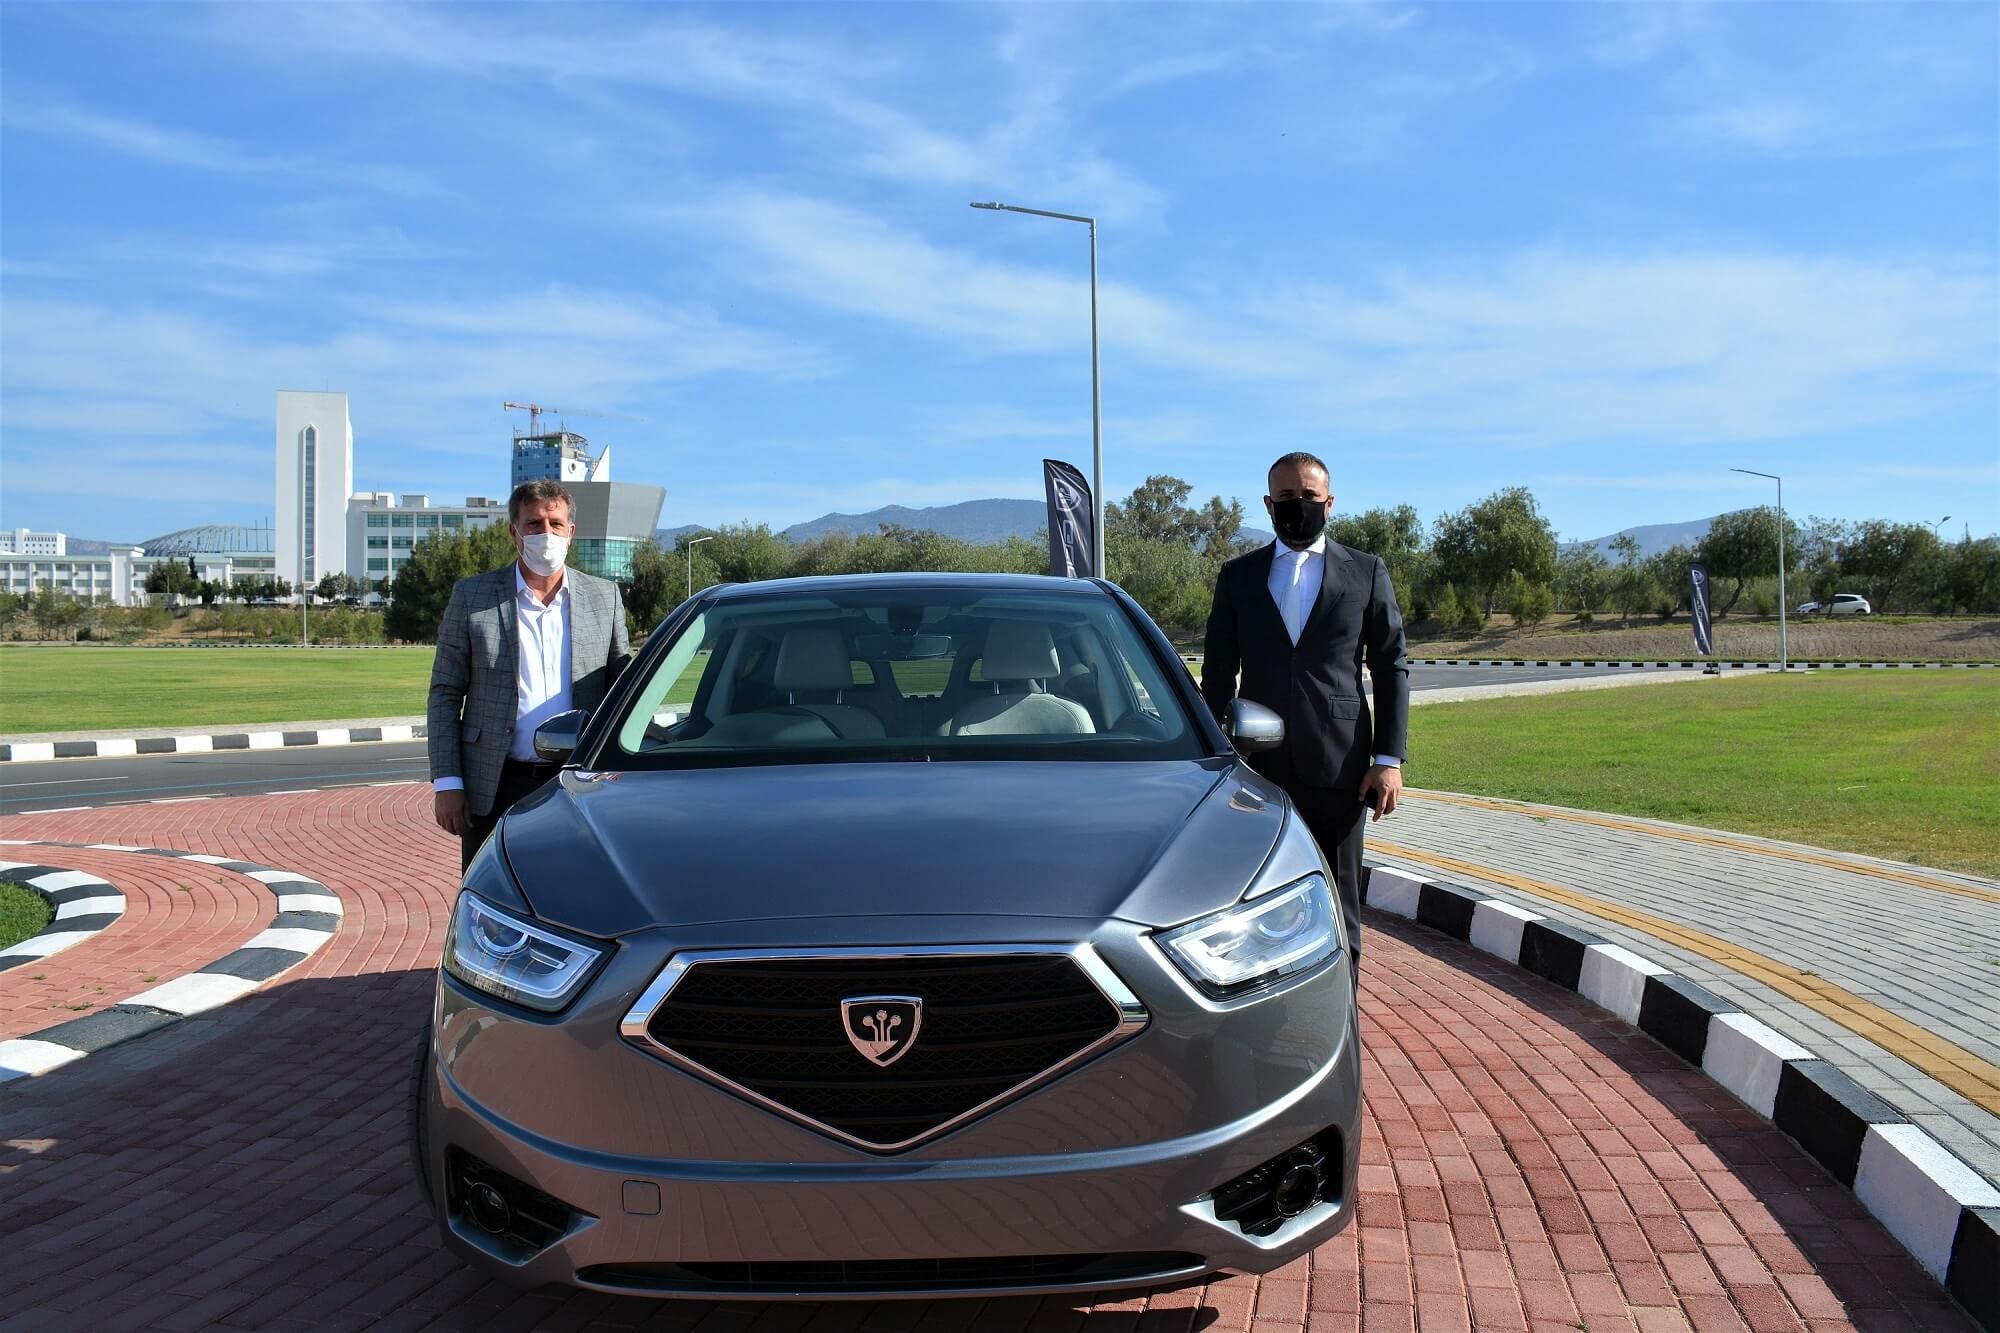 Deputy Prime Minister and Economy and Energy Minister Erhan Arıklı, Tested the TRNC’s Domestic Automobile “GÜNSEL”: “GÜNSEL should be seen as a state project. As a state, it is our duty to support GÜNSEL”